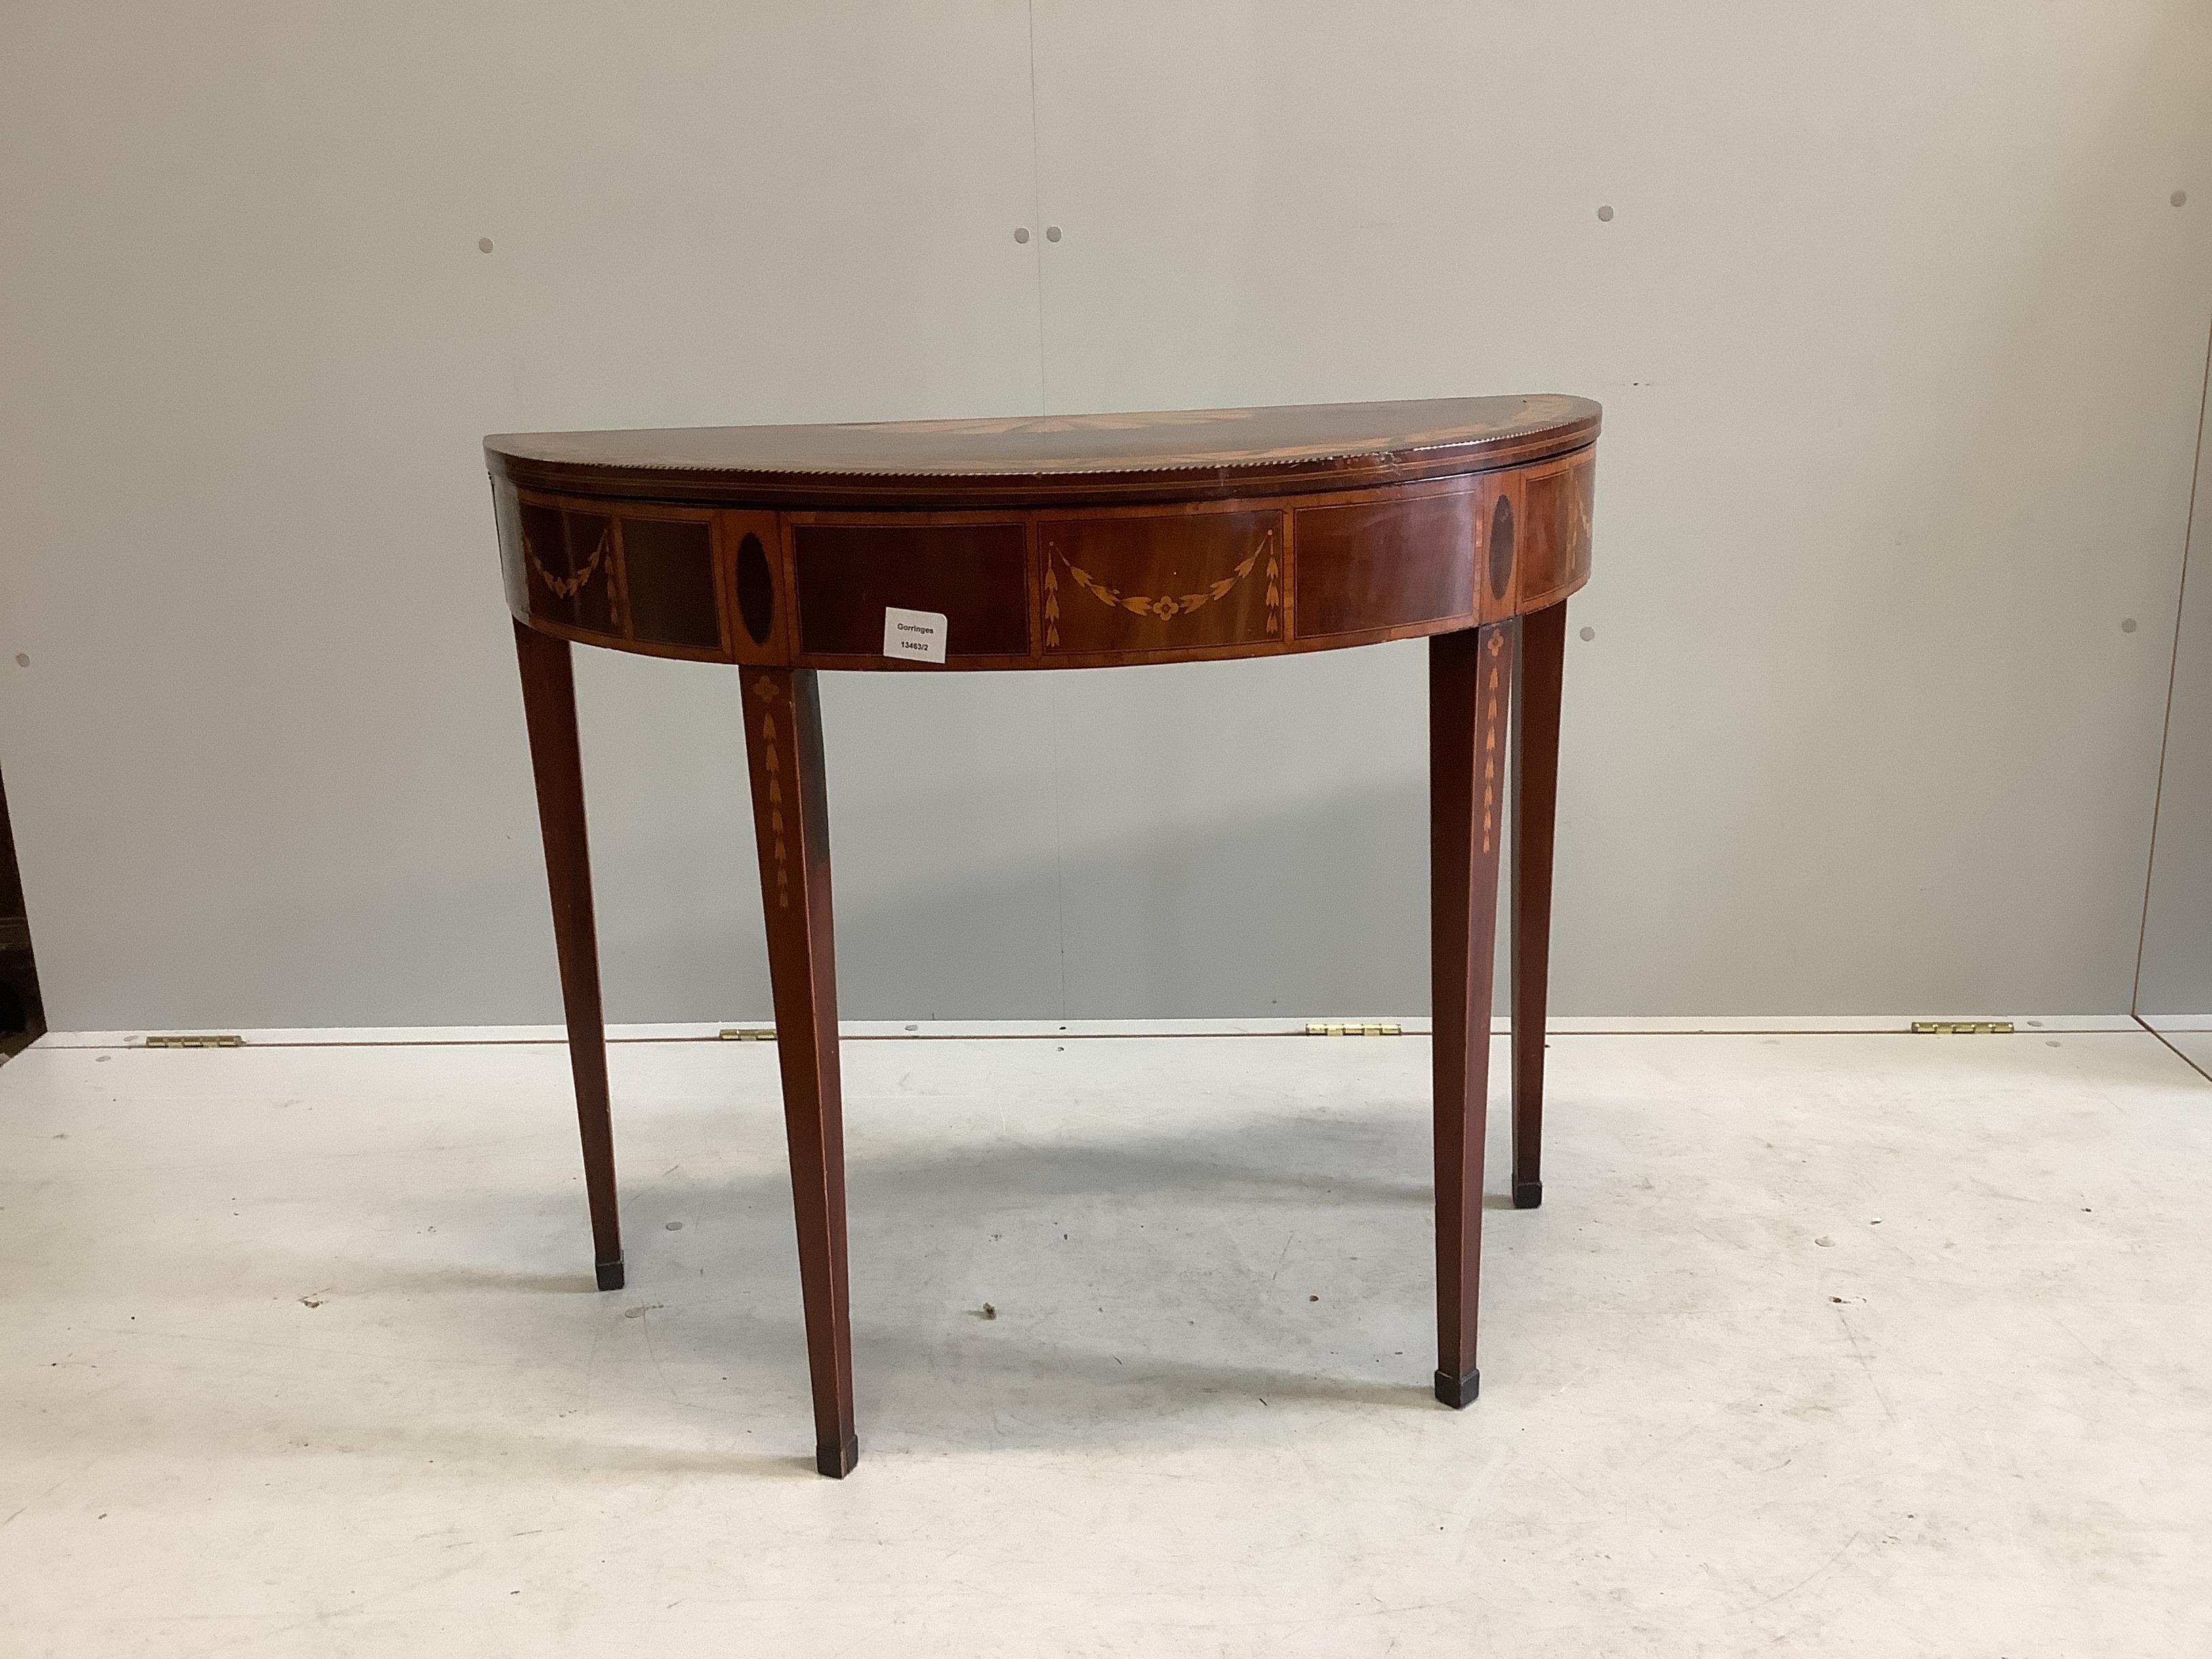 An Edwardian Sheraton Revival inlaid mahogany and marquetry D shaped card table, width 89cm, depth 44cm, height 75cm                                                                                                        